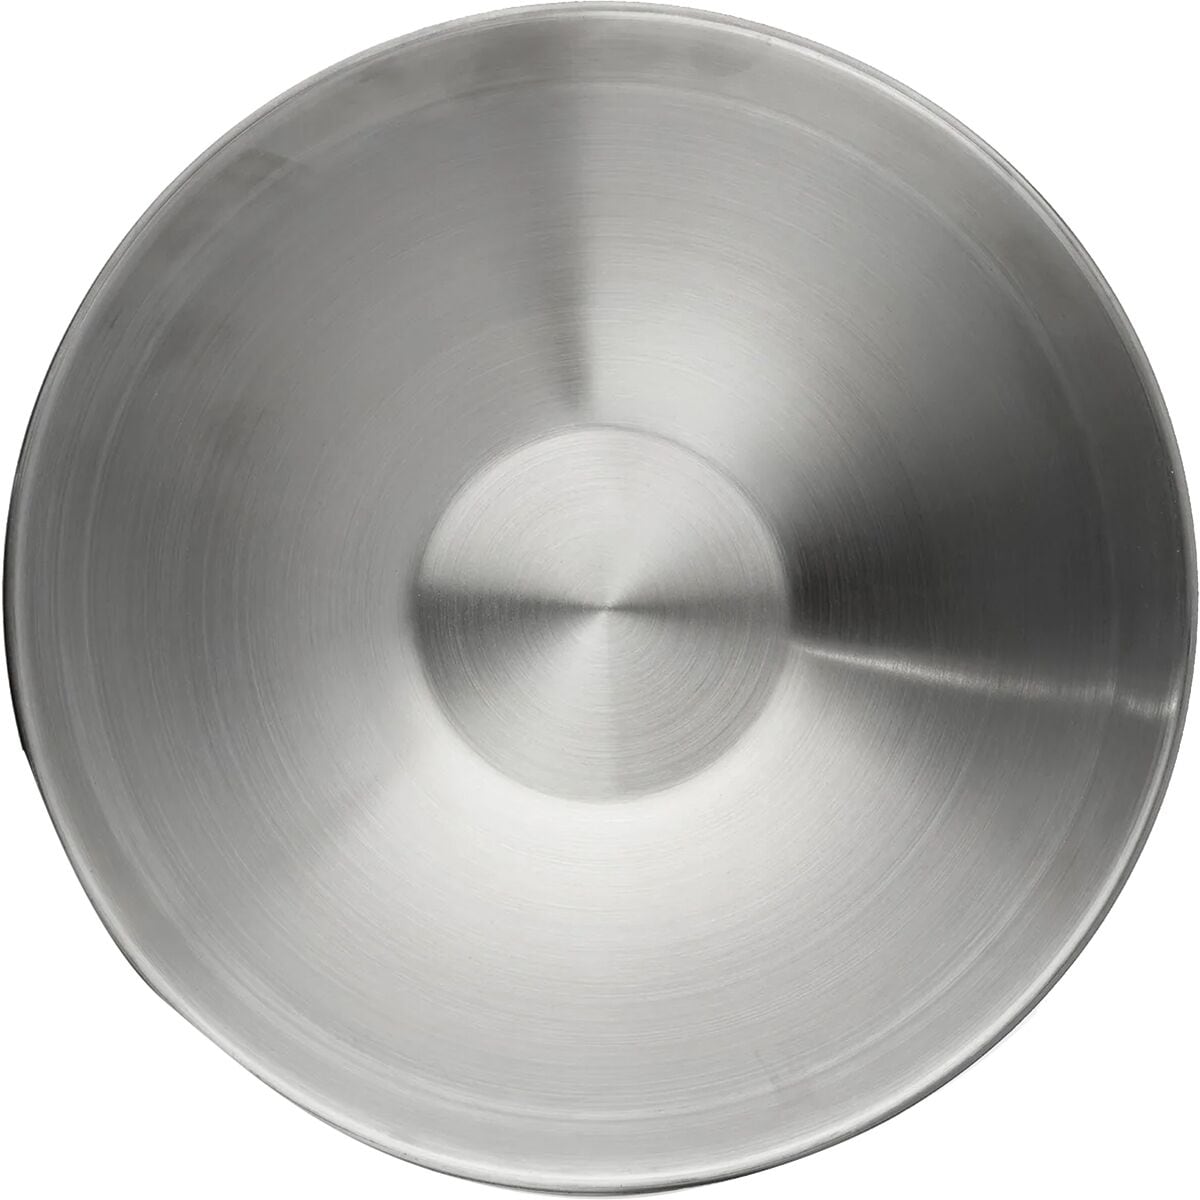  Primus Stainless Steel Campfire Bowl - Hike & Camp